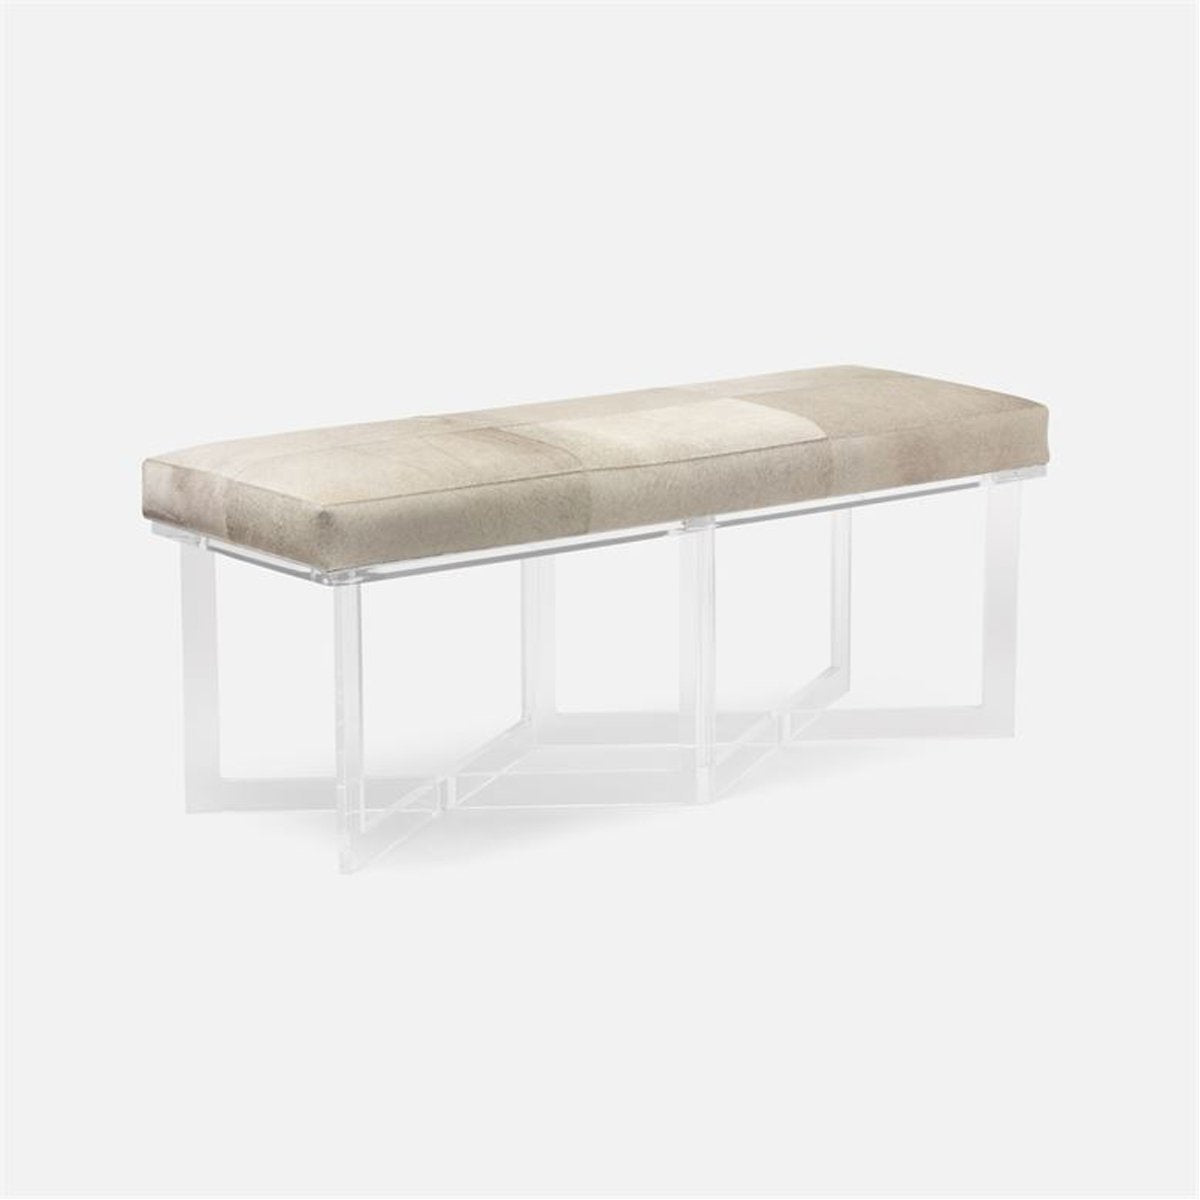 Made Goods Lex Clear Acrylic Double Bench in Nile Fabric